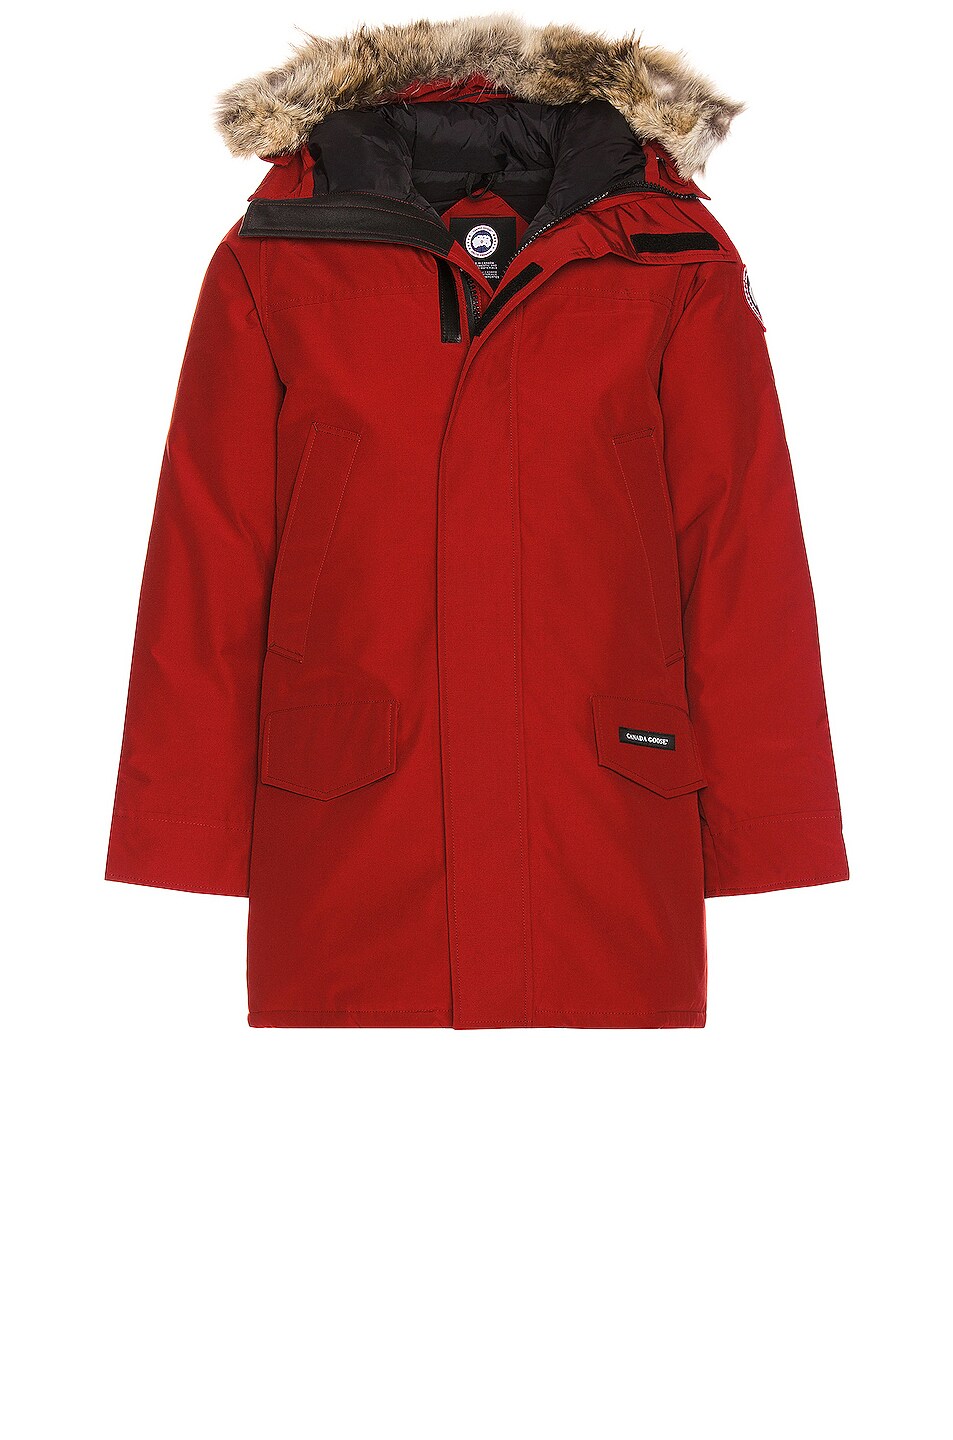 Image 1 of Canada Goose Langford Parka in Red Maple